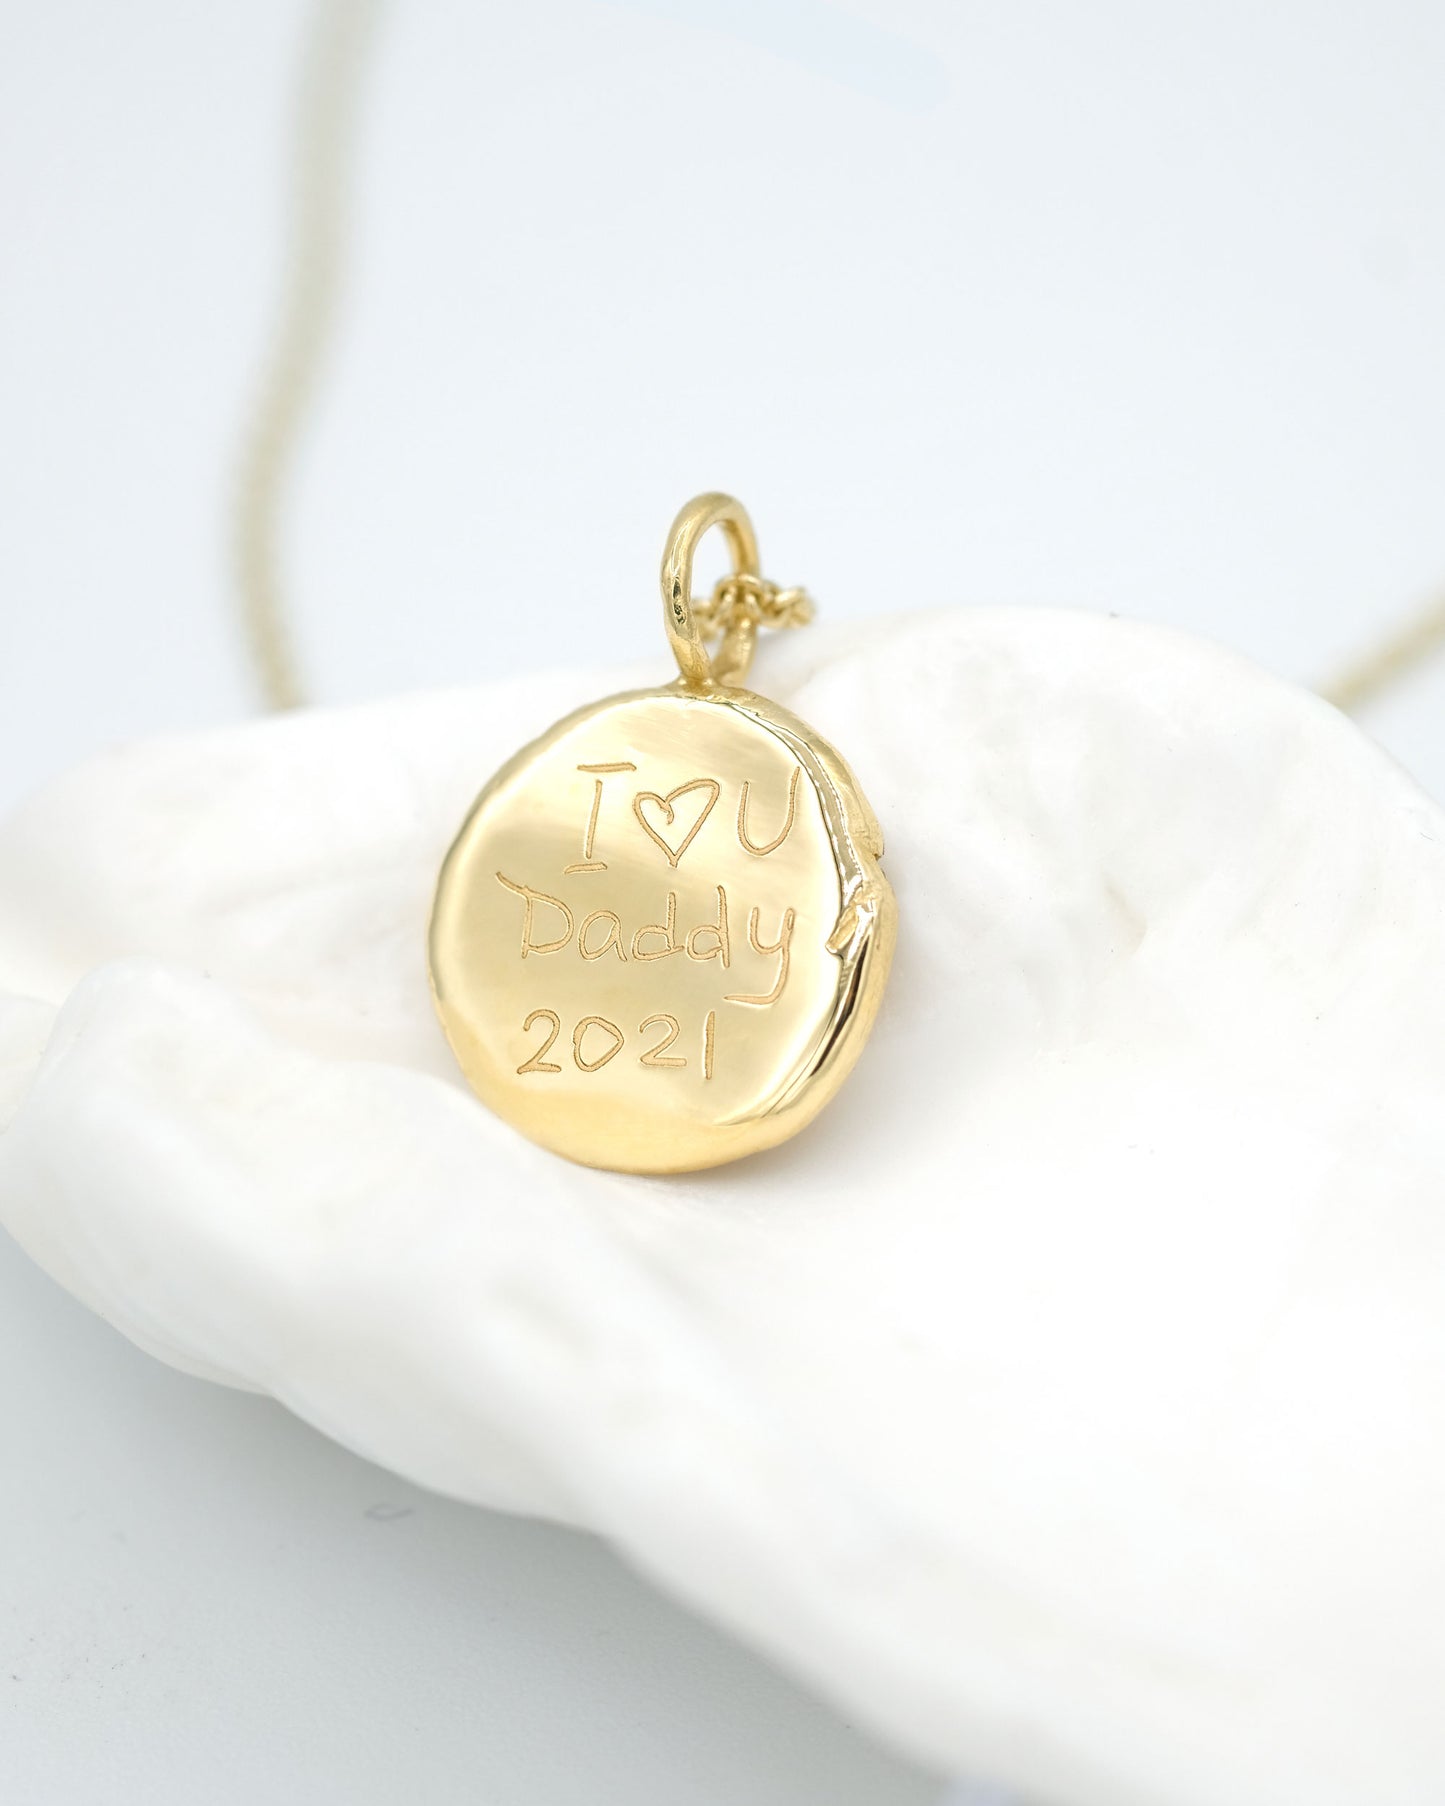 Fingerprint Necklace in solid gold on 1.5mm chain